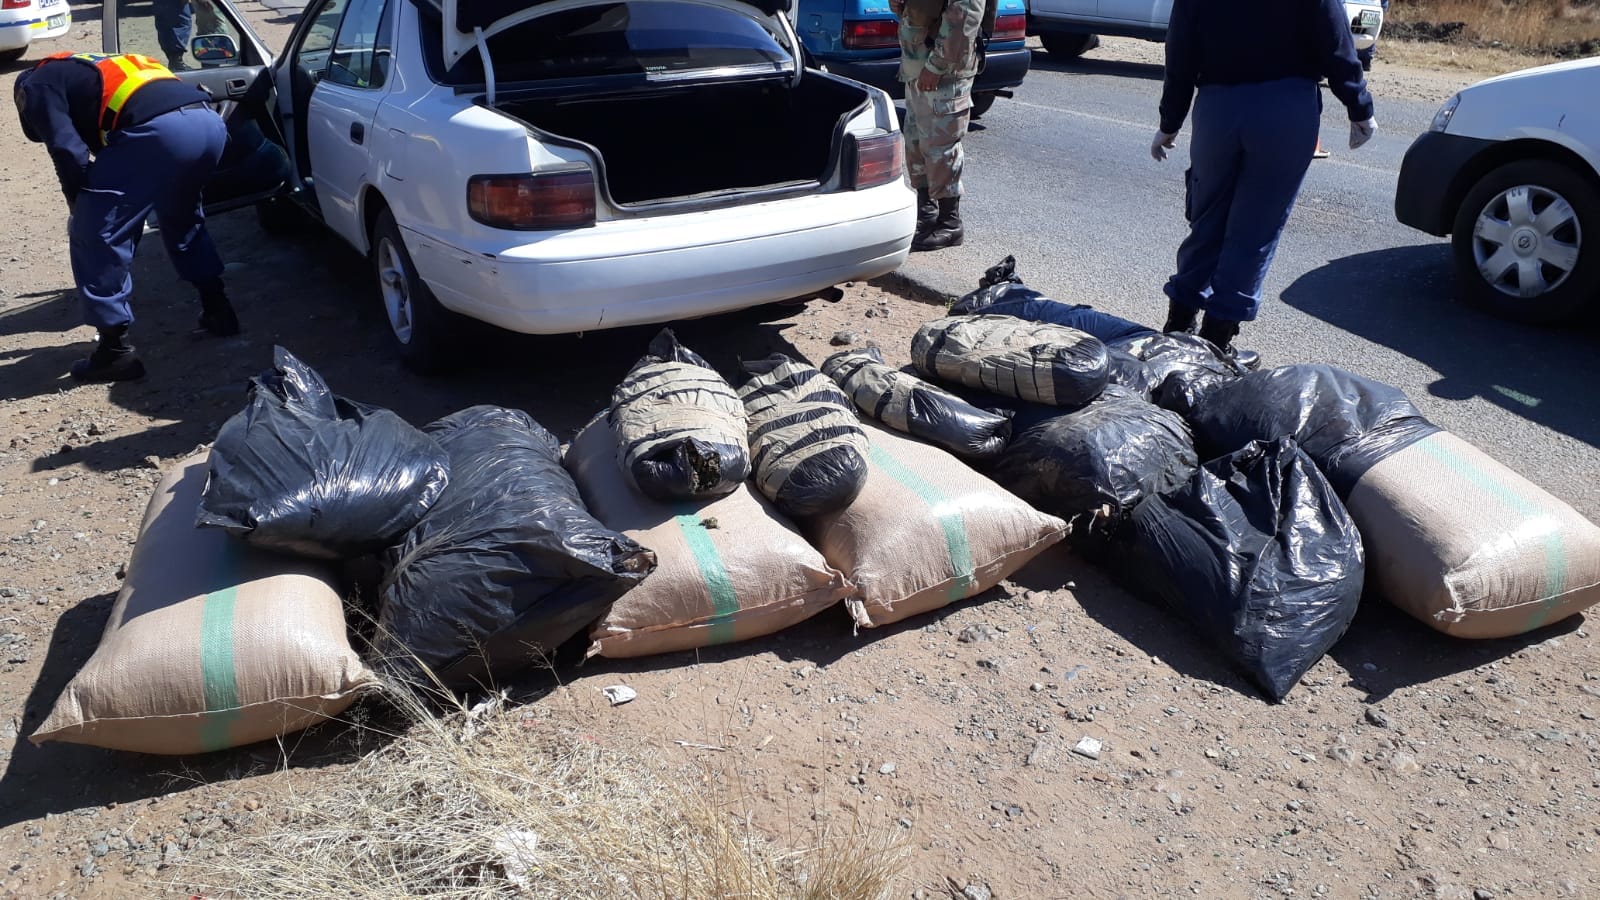 Suspect arrested for dealing in drugs worth R2.2 million